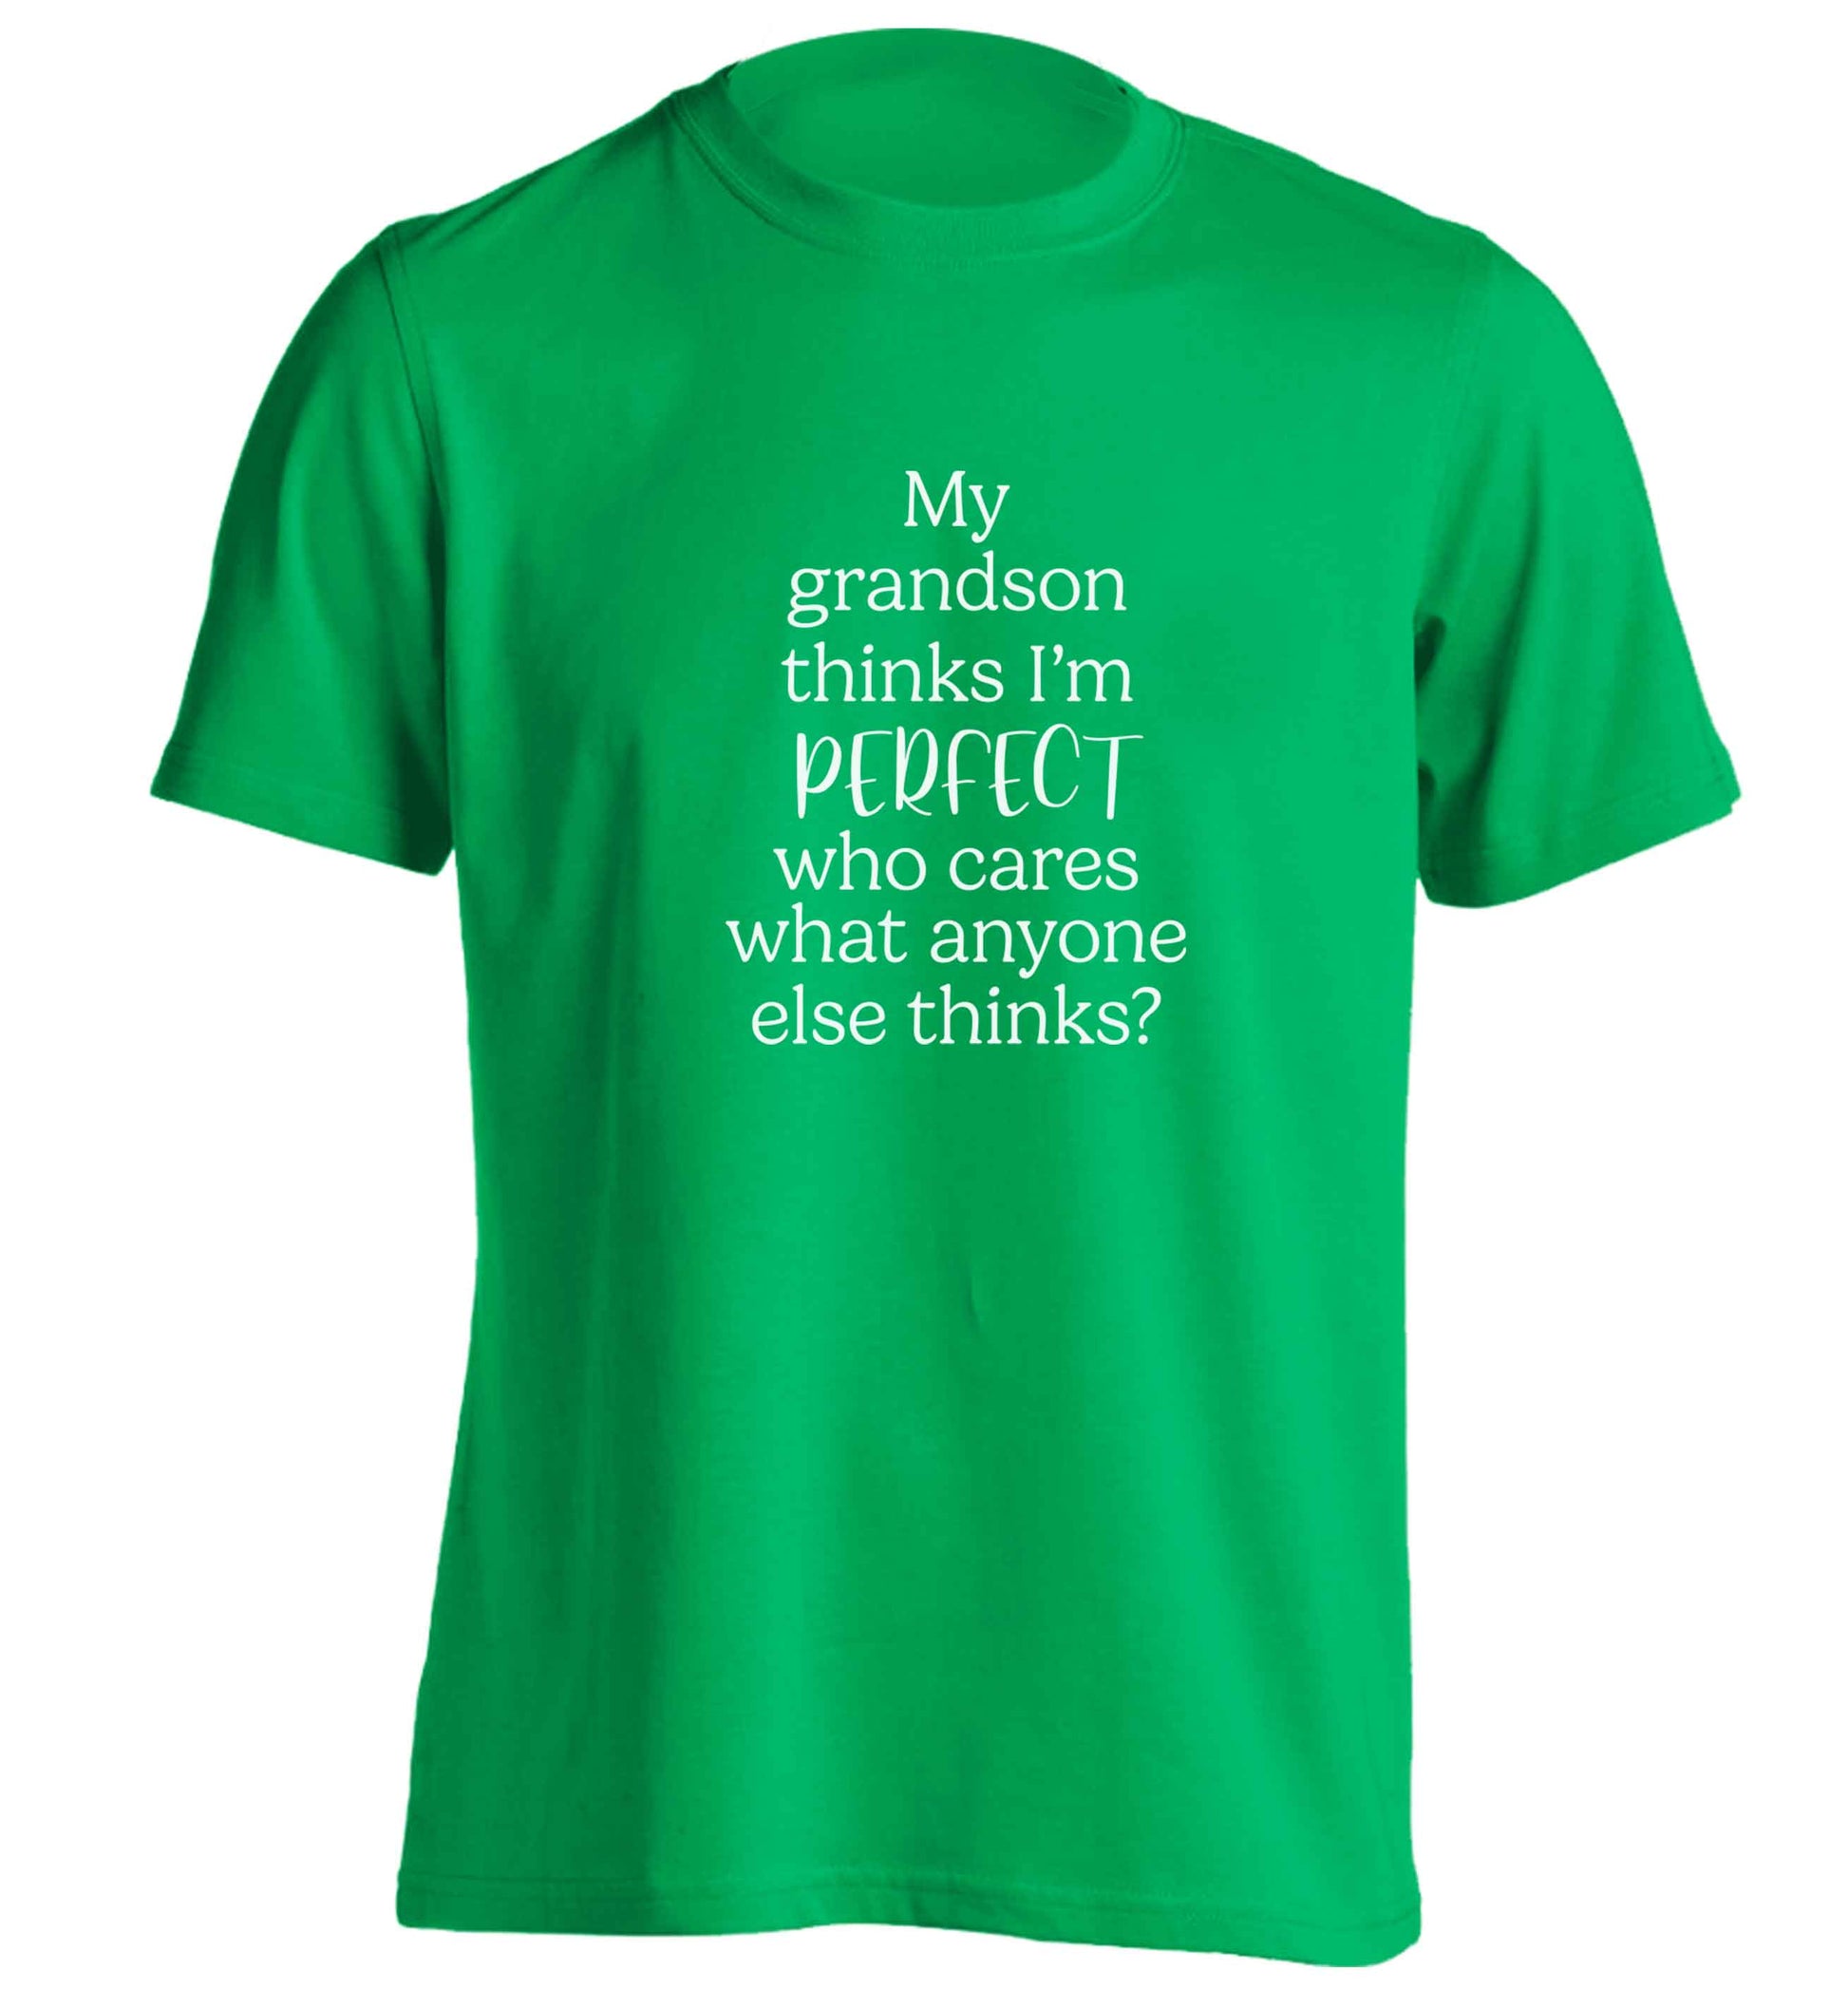 My Grandson thinks I'm perfect who cares what anyone else thinks? adults unisex green Tshirt 2XL